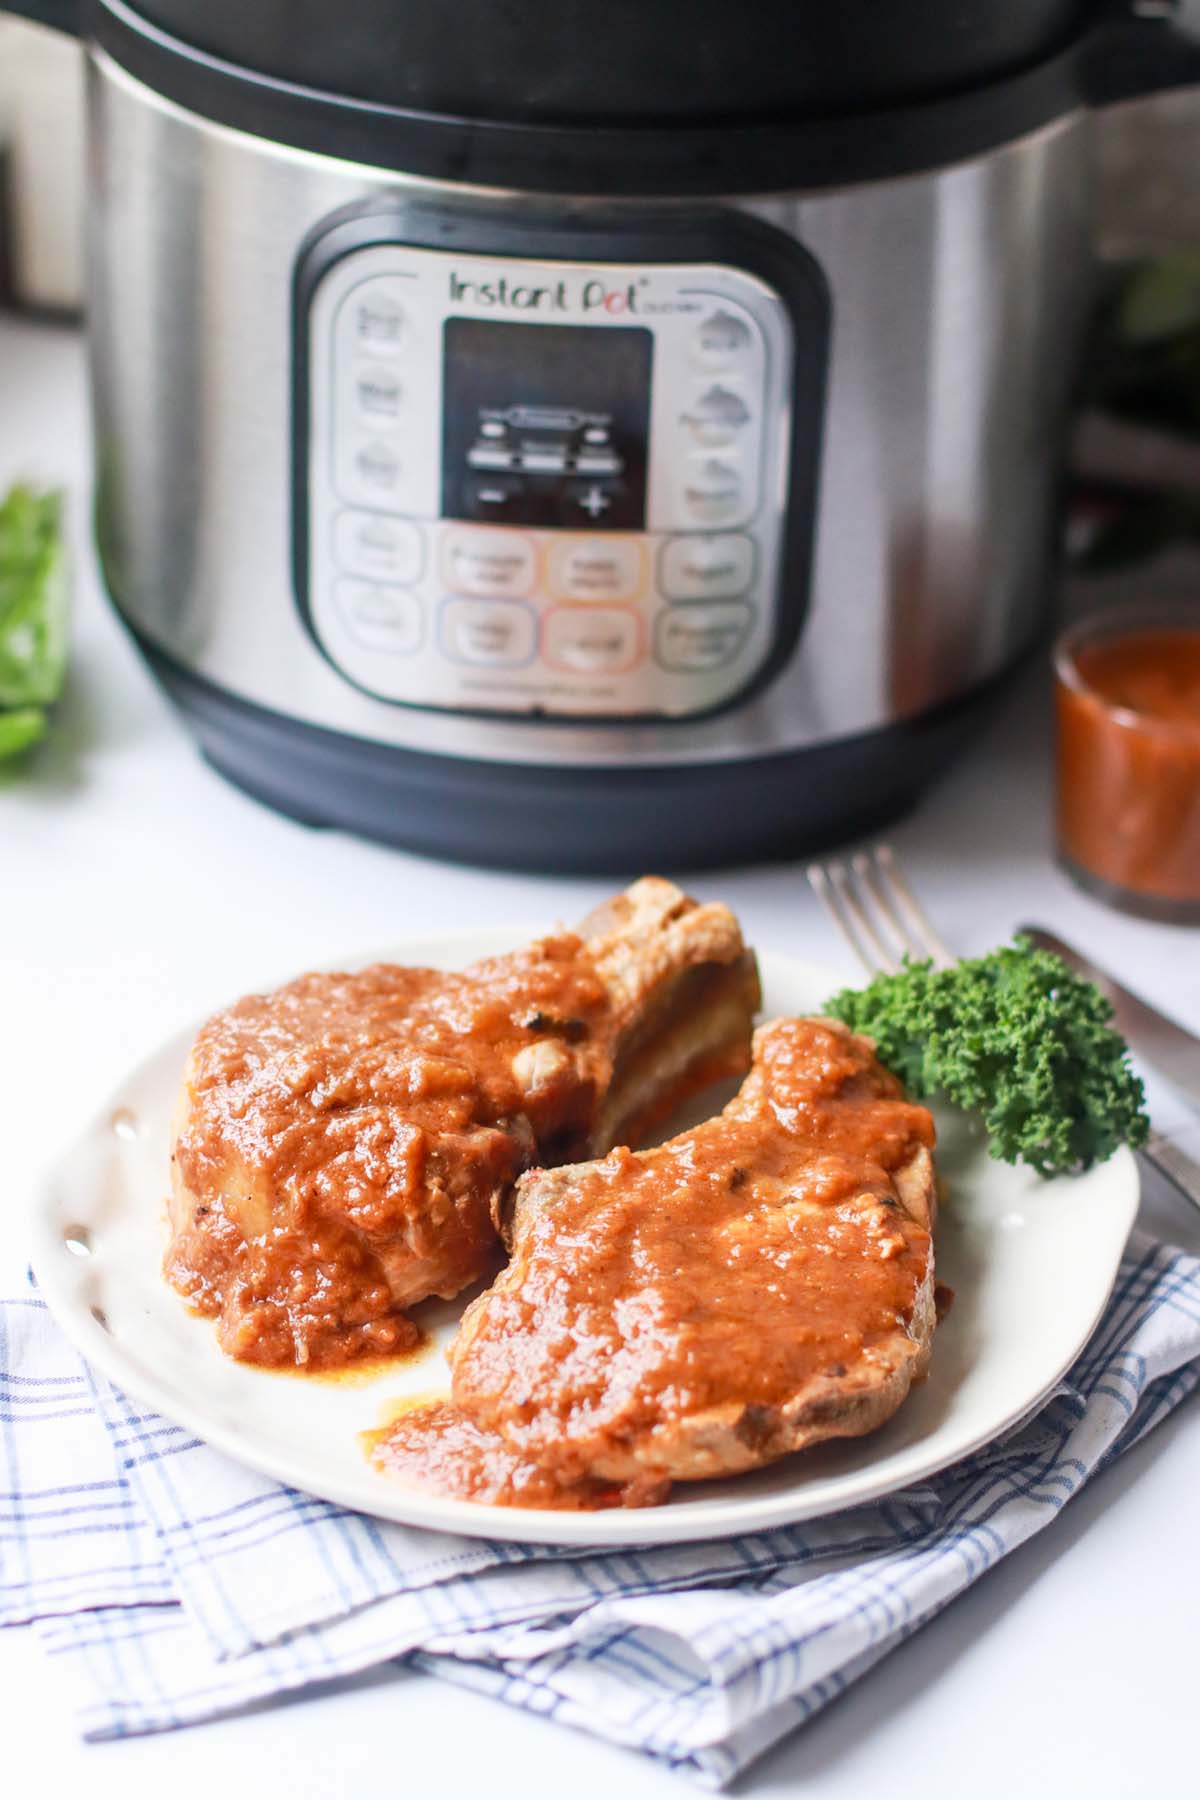 Pork chops on a plate in front of the Instant Pot.